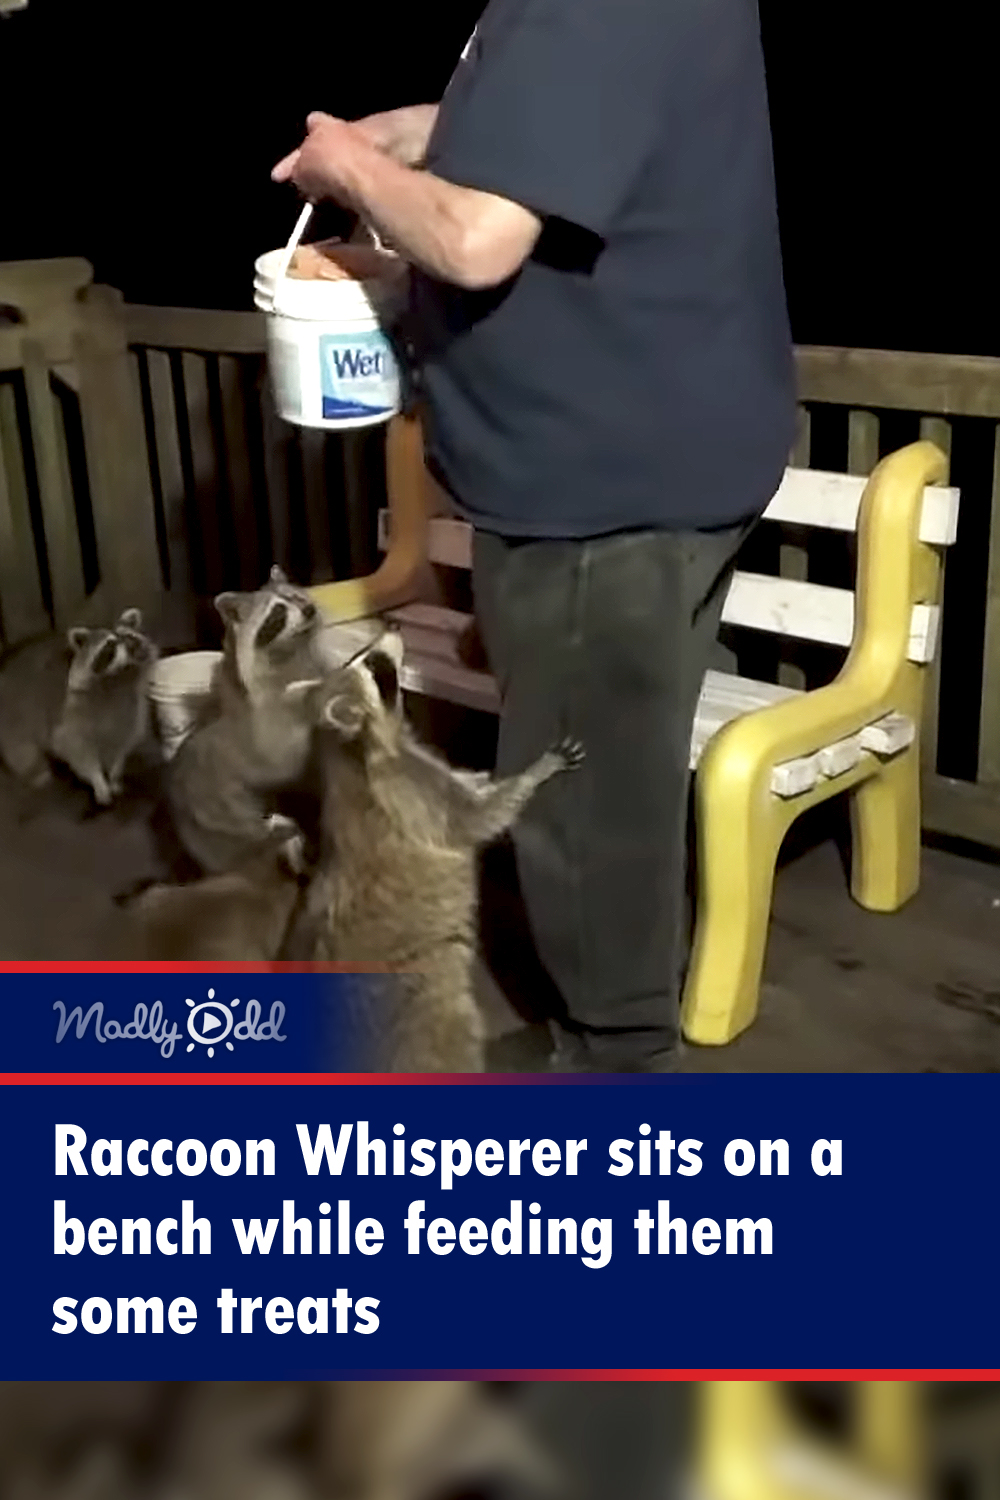 Raccoon Whisperer sits on a bench while feeding them some treats